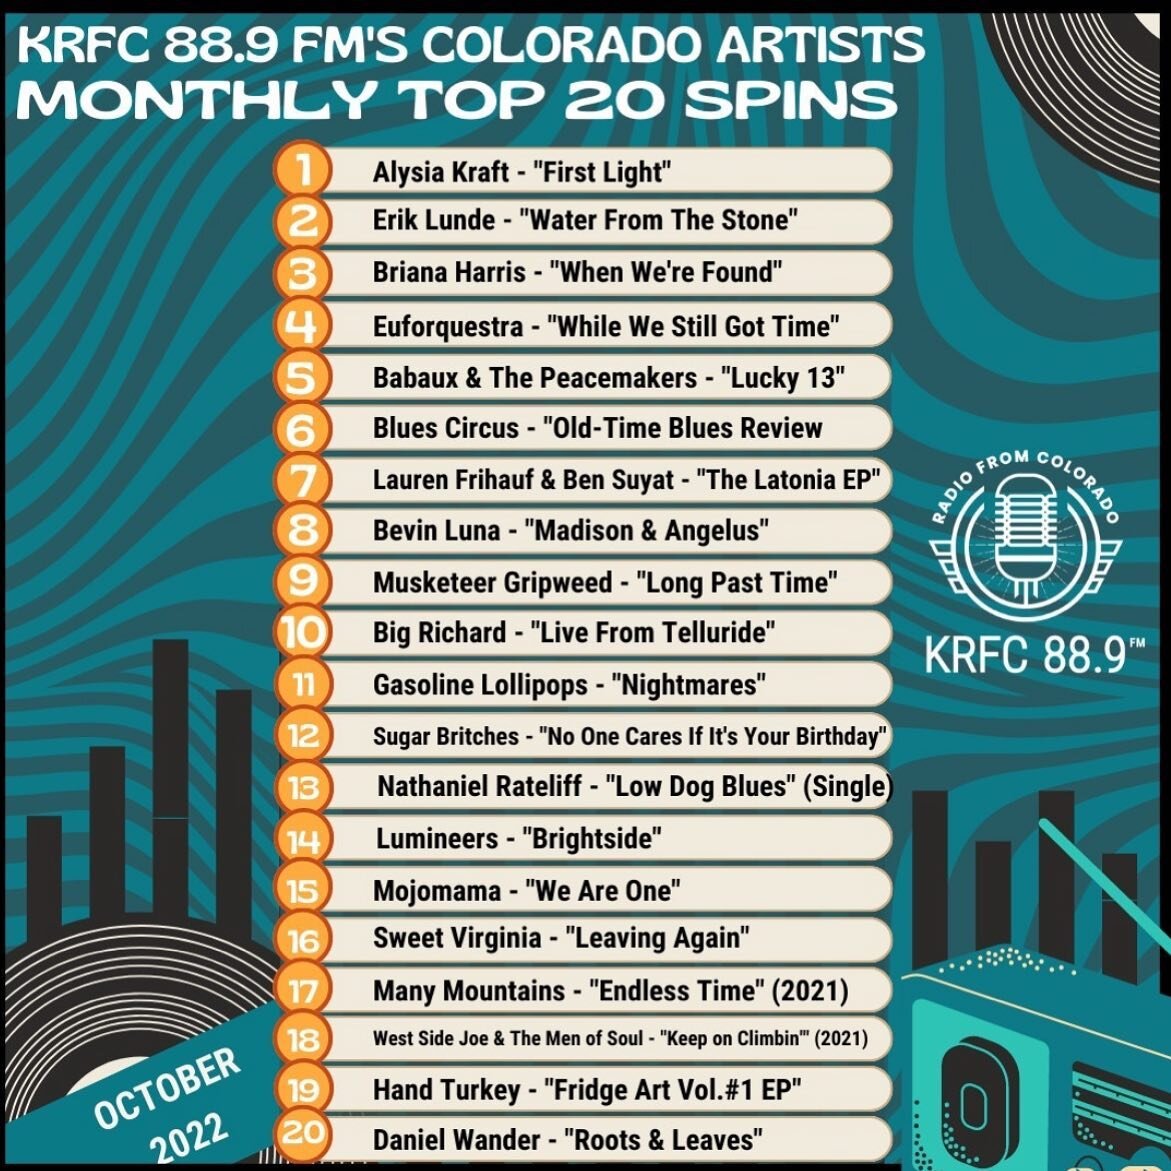 So this is way cool! Thank you @krfcfm for spinning my new record &ldquo;When We&rsquo;re Found&rdquo; on one of my favorite local stations. I&rsquo;m honored to be in such killer company with artists like @alysiakraft, @bigrichardband, @euforquestra